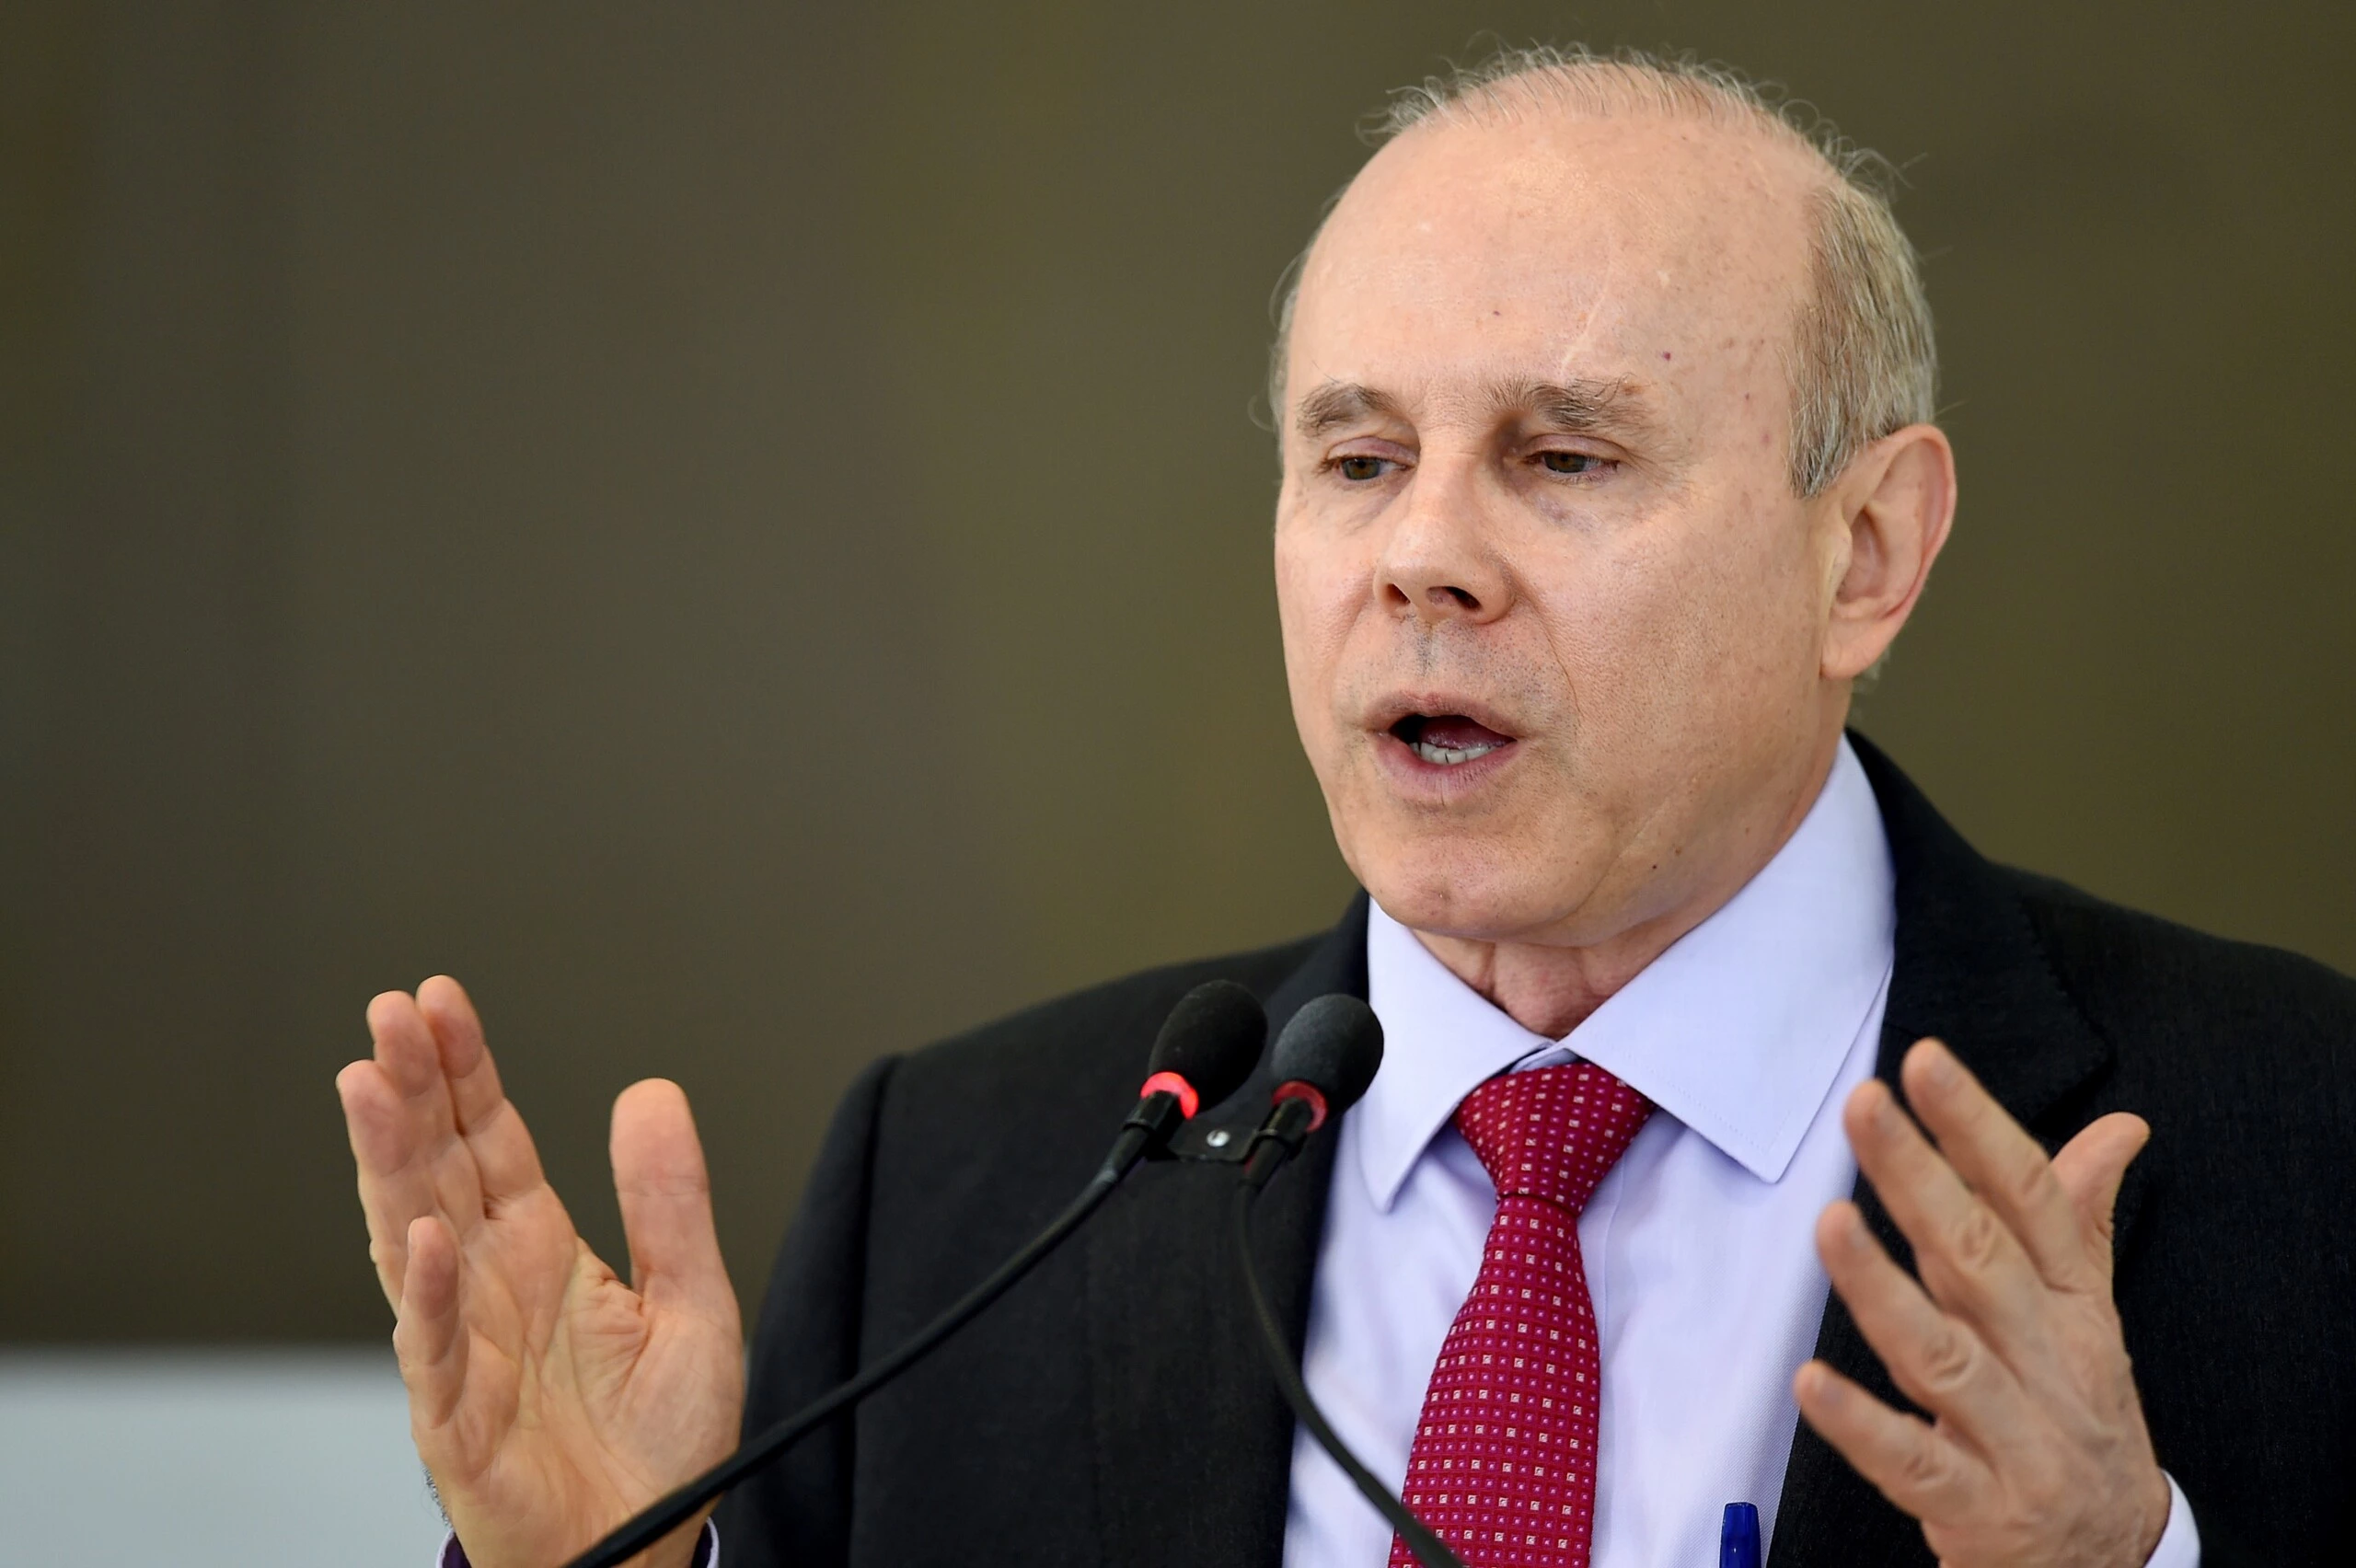 Brazilian Finance Minister Guido Mantega speaks during a meeting  of the Council of Economic and Social Development at the Palacio do Planalto in Brasilia on June 5, 2014. At one week of the start of the FIFA World Cup Brazil 2104, the government faces threats of strikes in various sectors like transportation, public safety and education, besides protests in all the host cities of the World Cup. AFP PHOTO/Evaristo SA        (Photo credit should read EVARISTO SA/AFP/Getty Images)